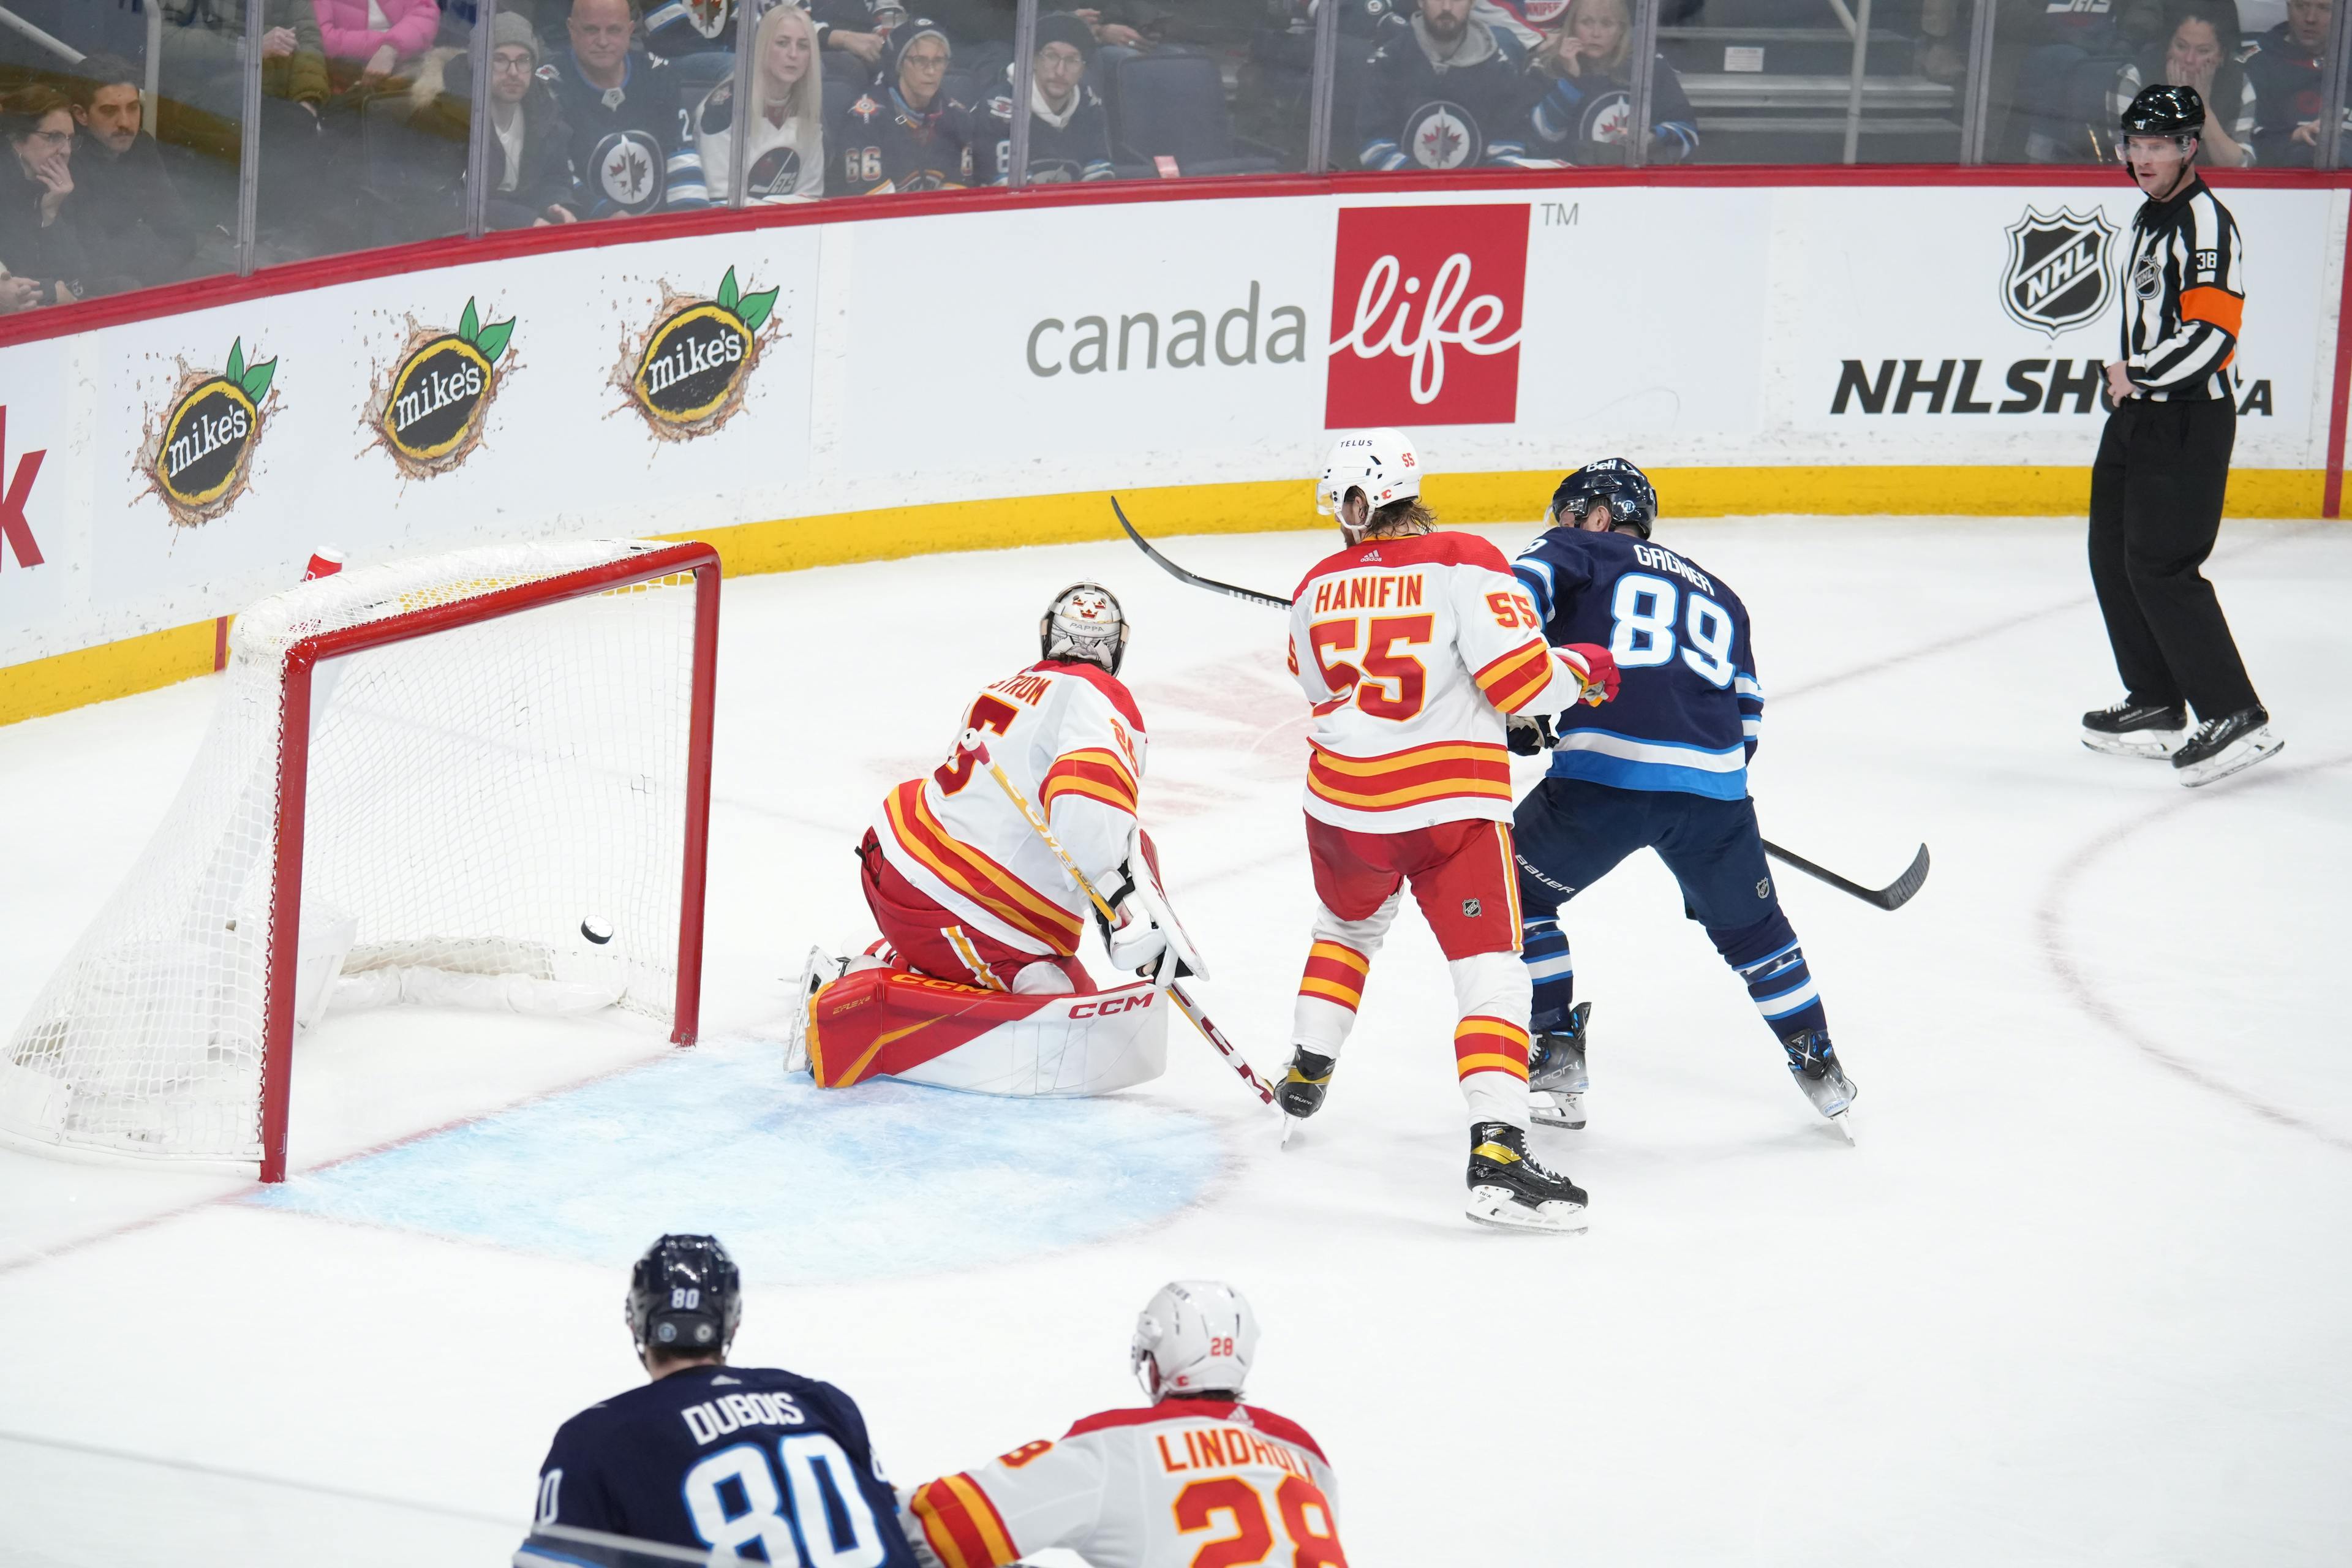 Jets Edge Flames 3-2, Win Third Straight Game